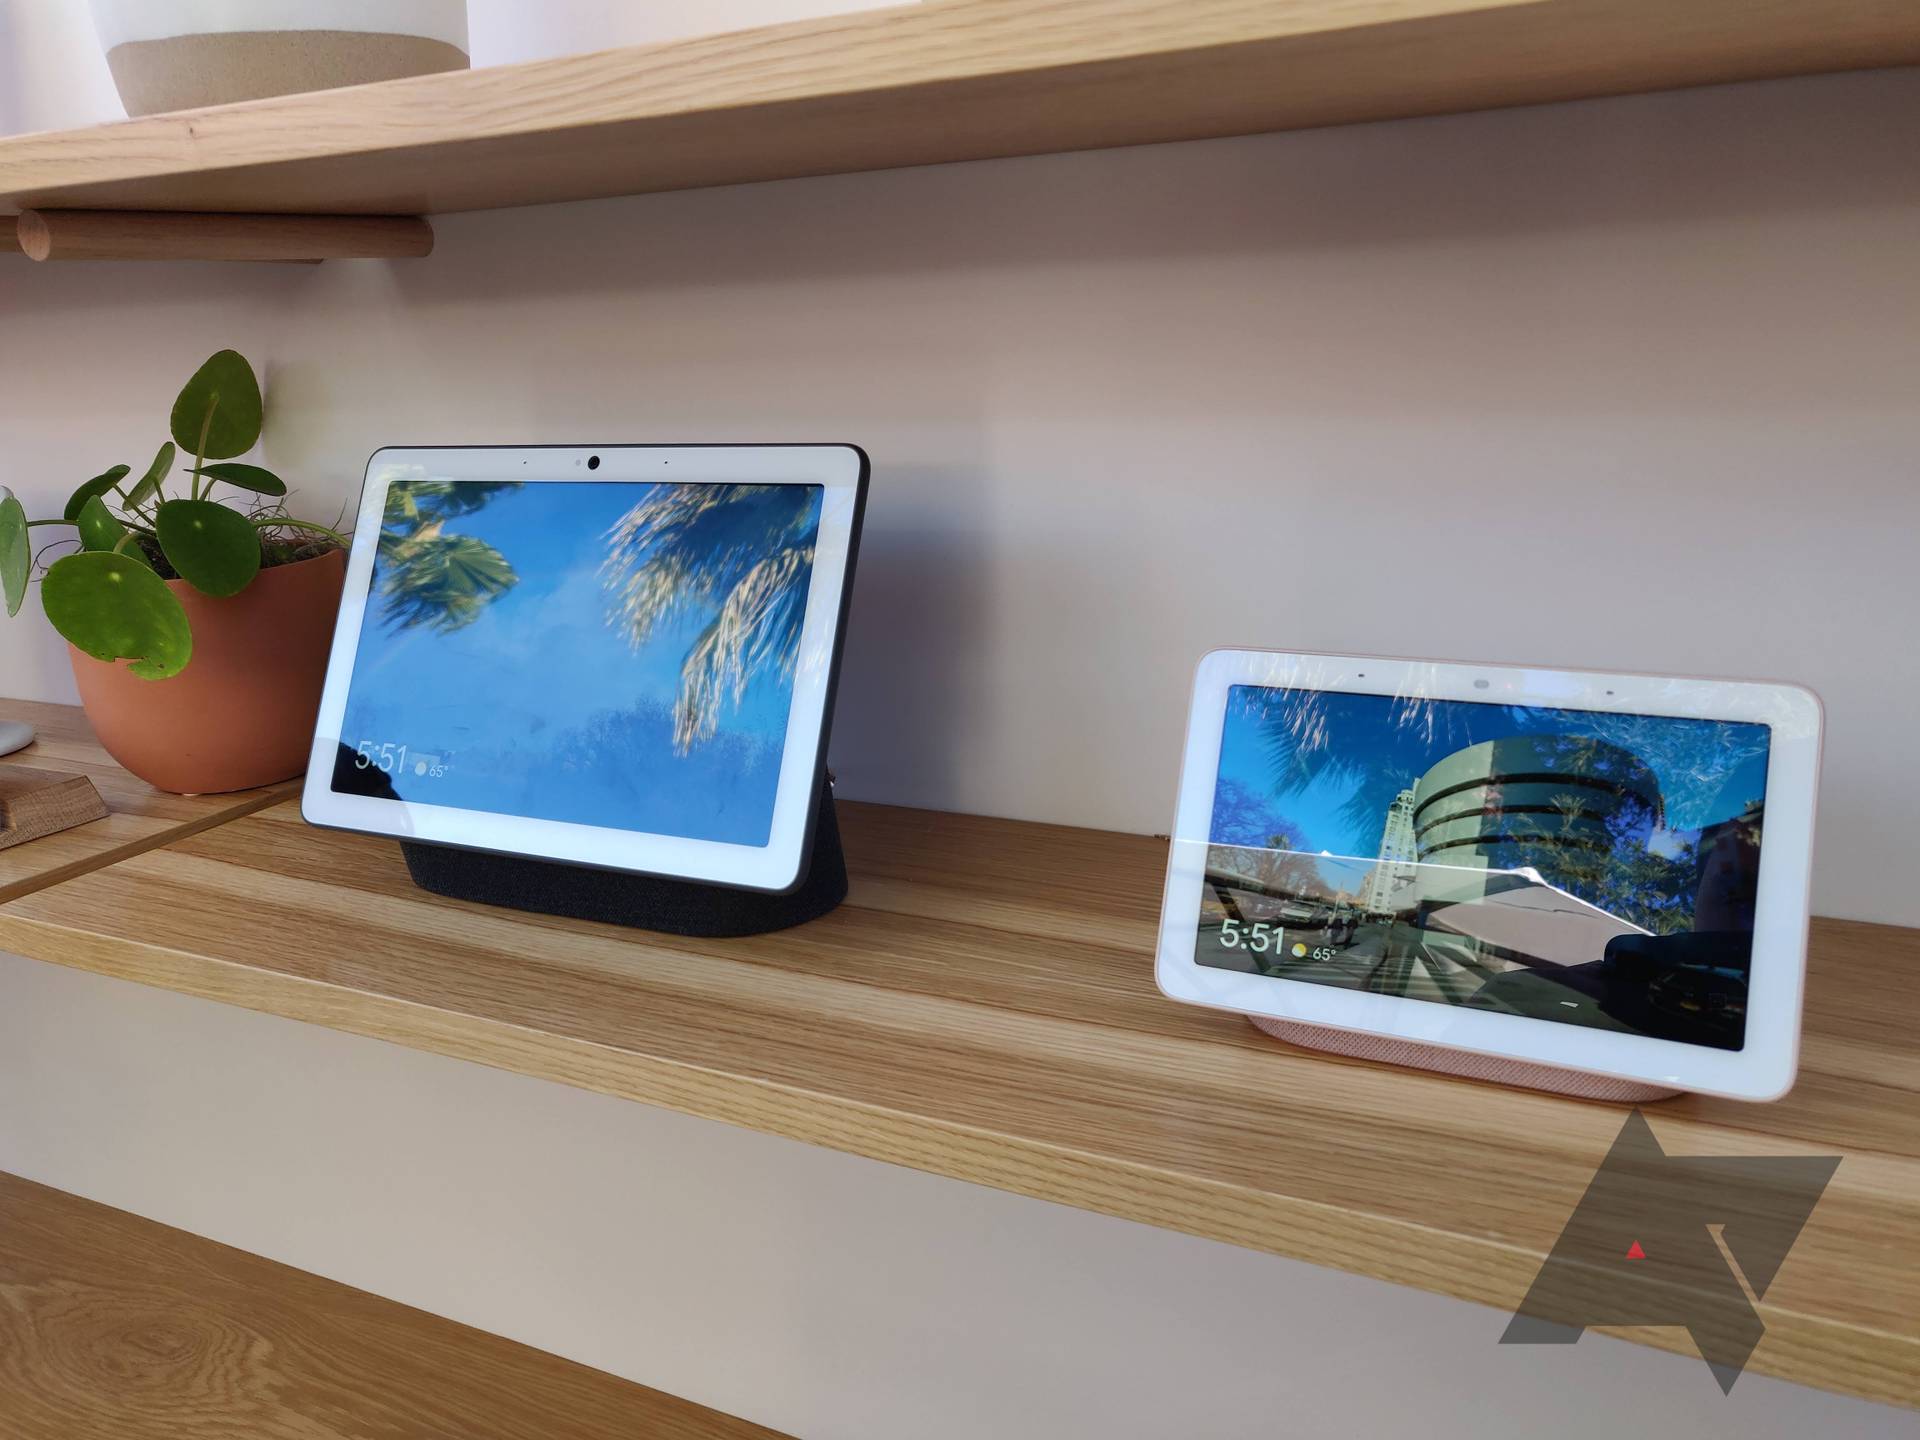 Google's Nest Hub Max could soon let you activate Assistant by just looking at it